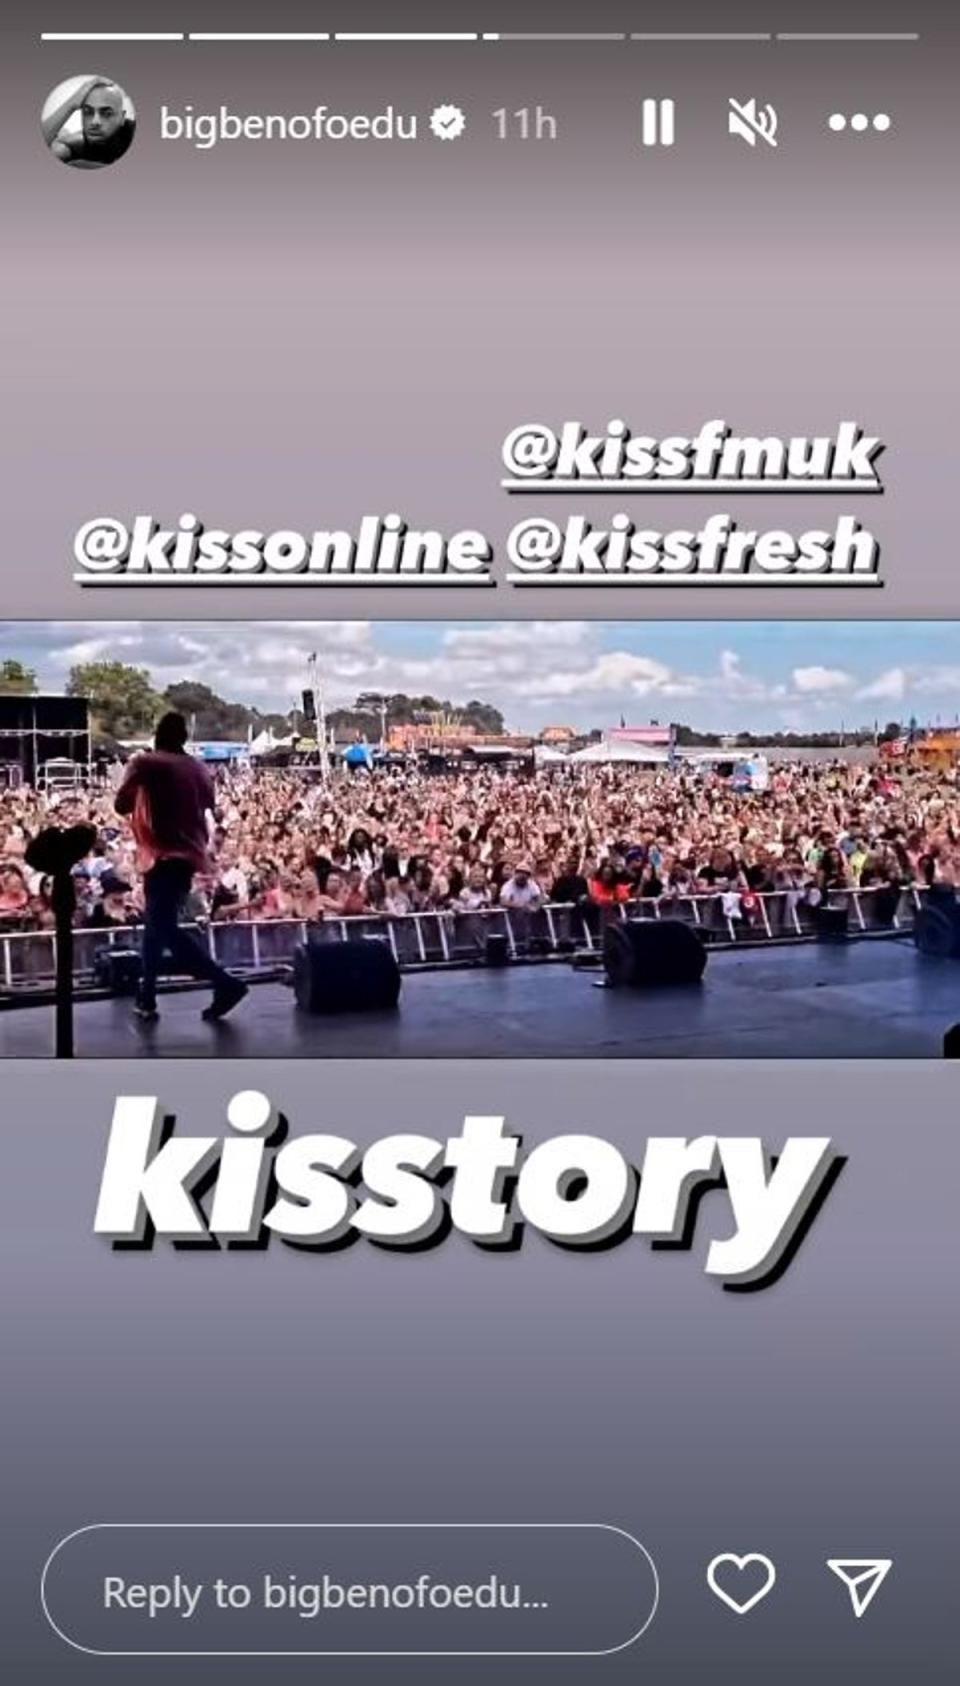 Ben Ofoedu said he wanted to do more music after performing at KISSTORY on Blackheath (Instagram)